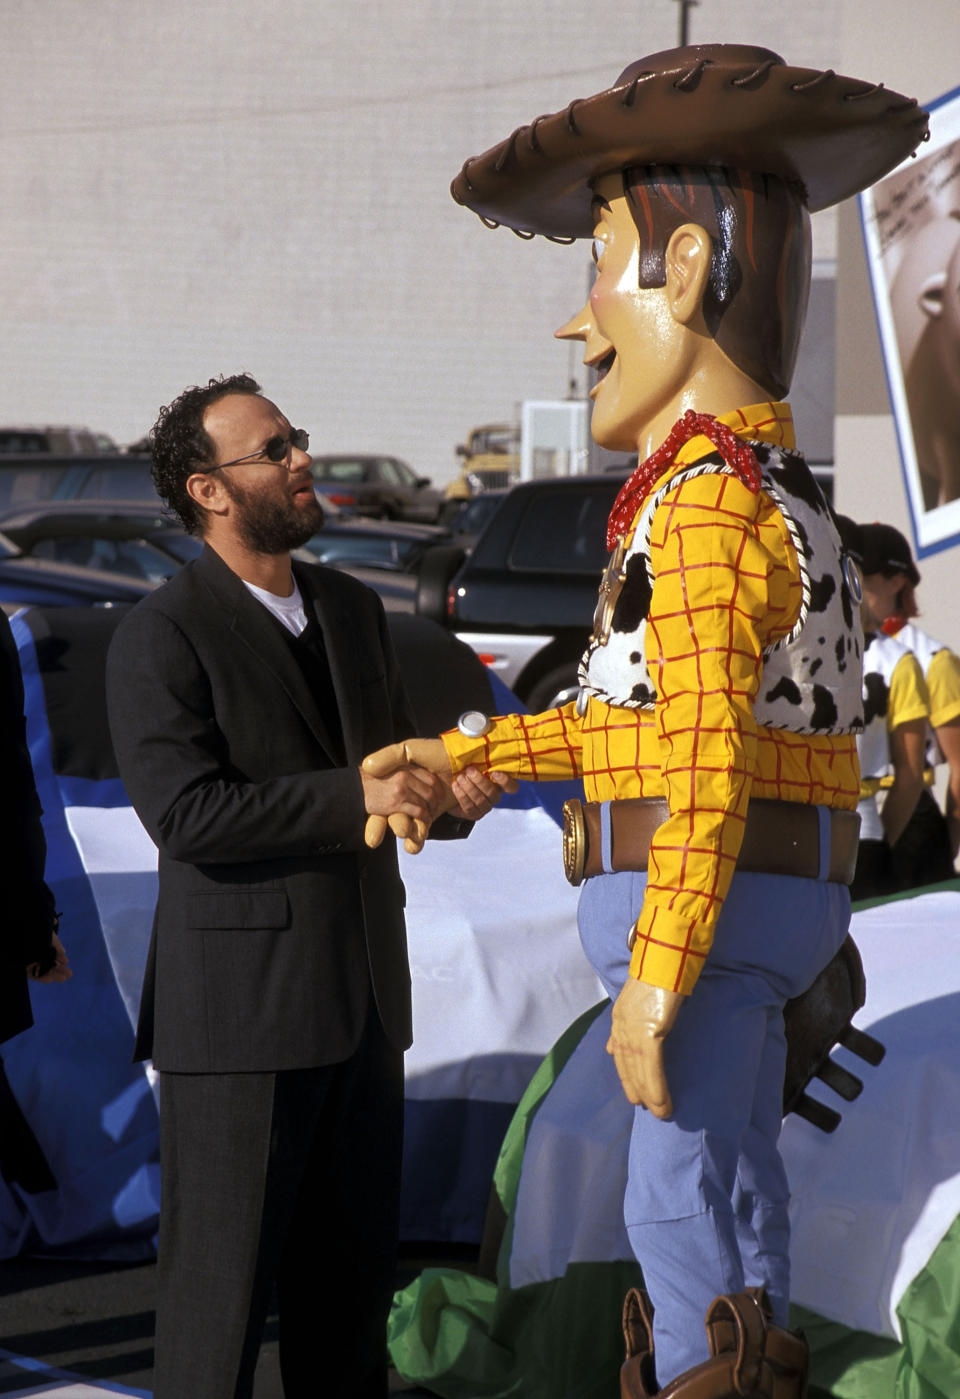 Actor Tom Hanks and Woody attend the "Toy Story 2" Themed NASCAR Racing Cars Unveiling on October 23, 1999 at the El Capitan Theatre in Hollywood, California. (Photo by Ron Galella, Ltd./Ron Galella Collection via Getty Images)